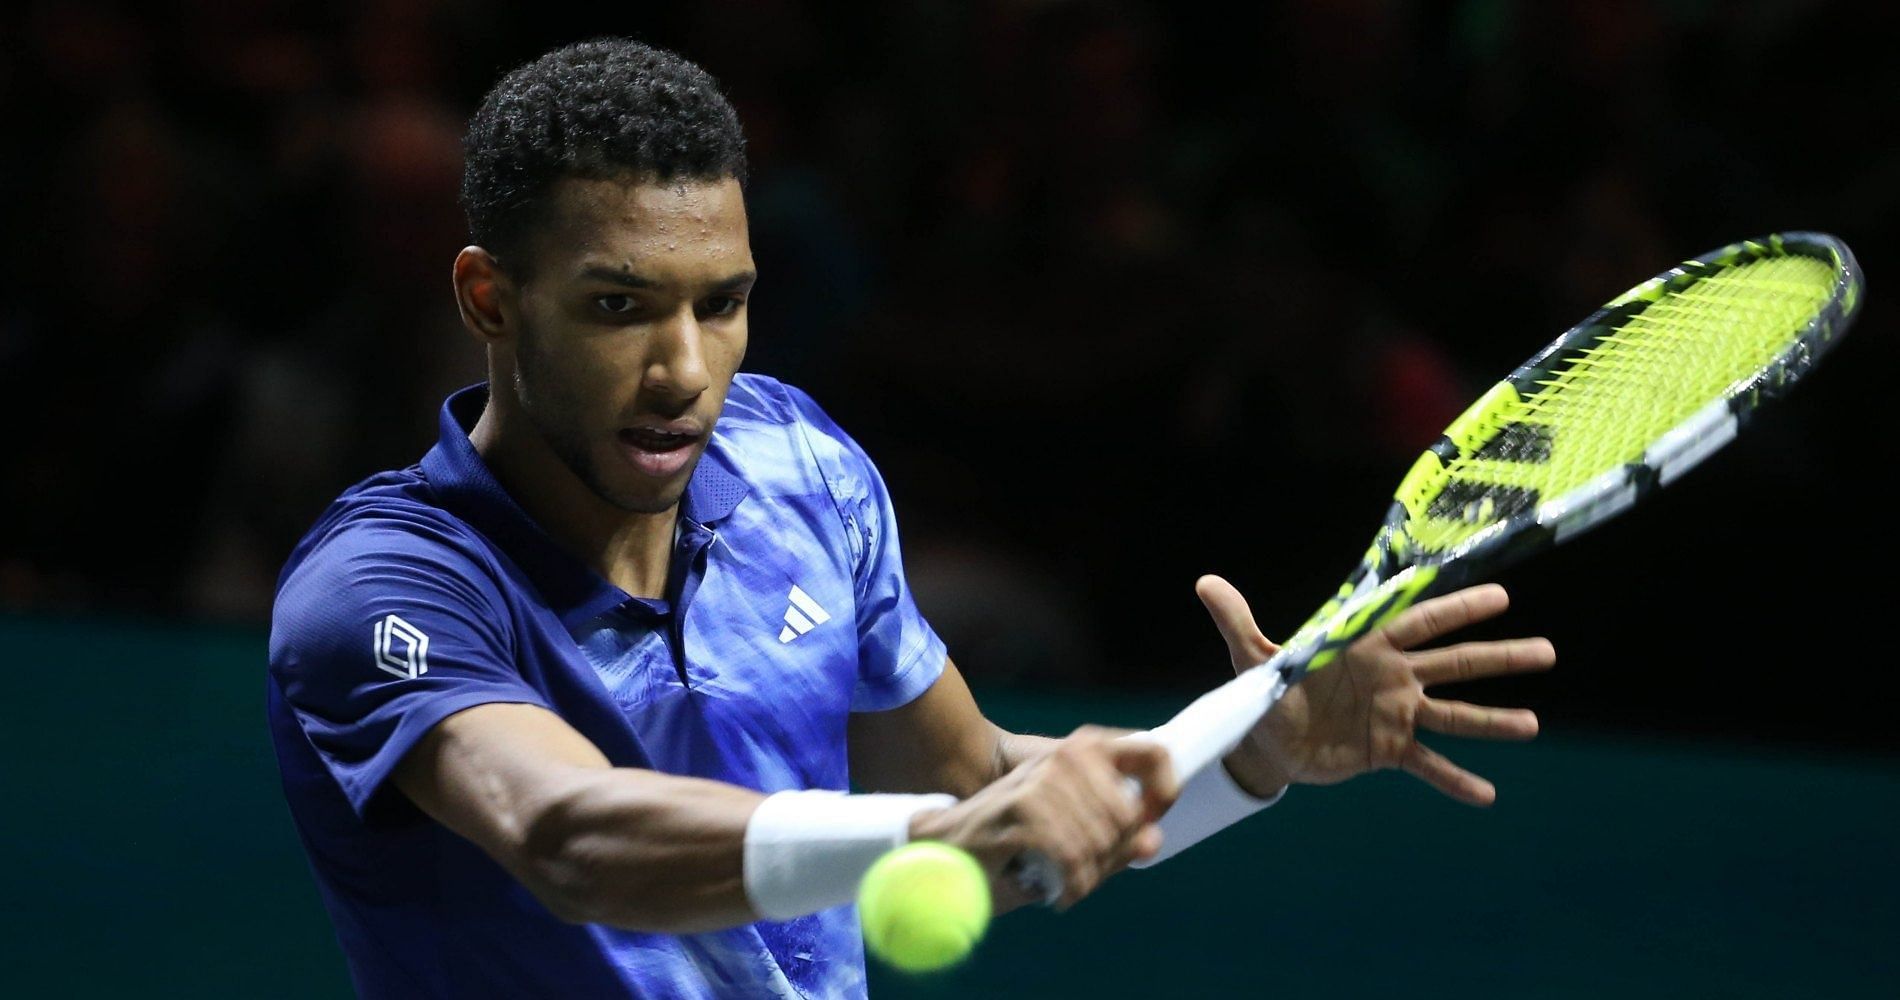 Felix Auger-Aliassime has been far from his best in 2023 due to shoulder issues